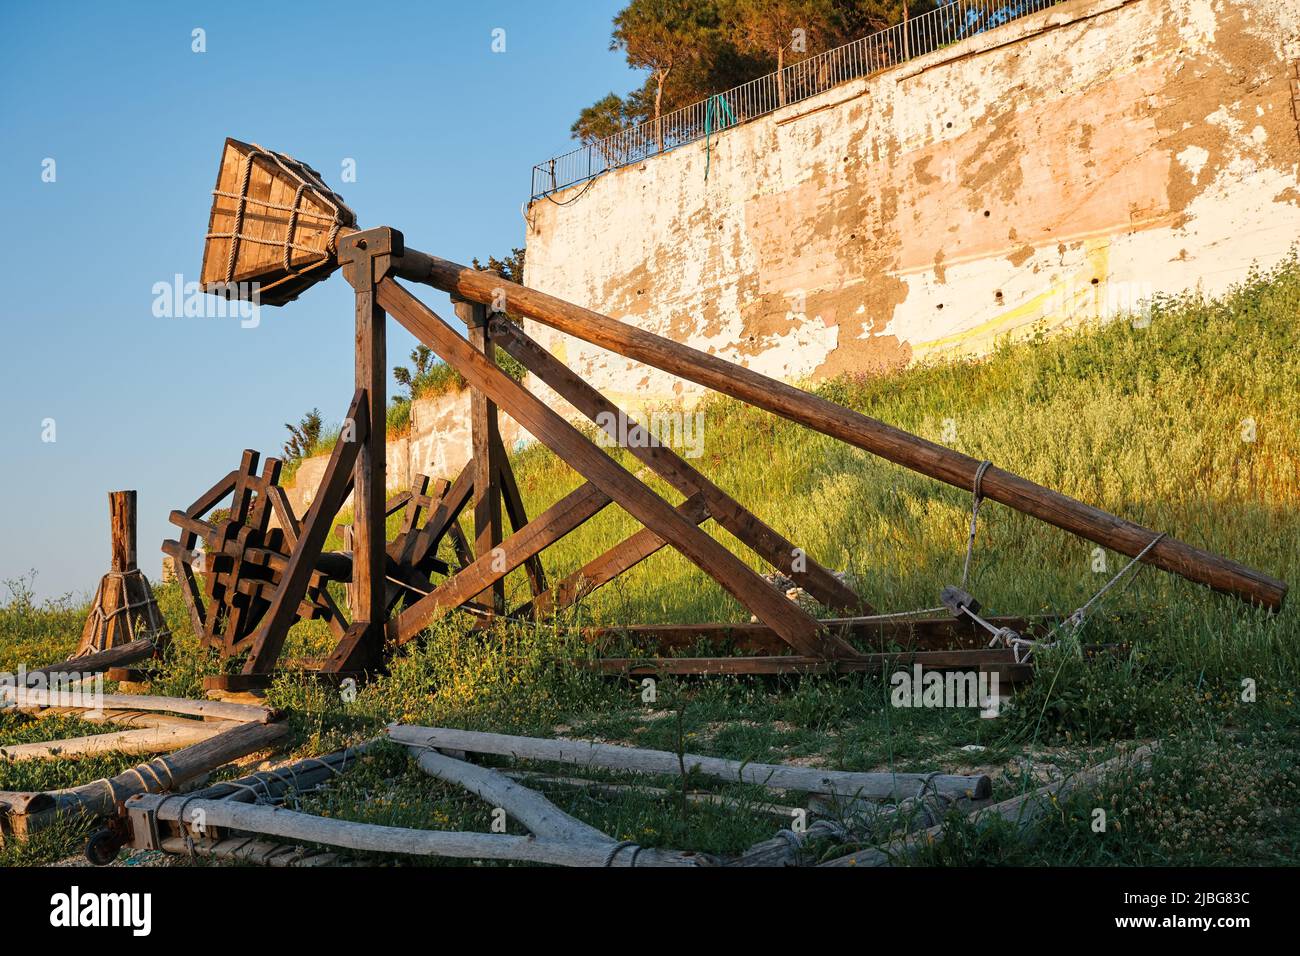 Urla, İzmir, Turkey - May 2022: Ancient Phoenician wooden trebuchet in at Urla Liman Tepe maritime archeology excavation and research center. Stock Photo